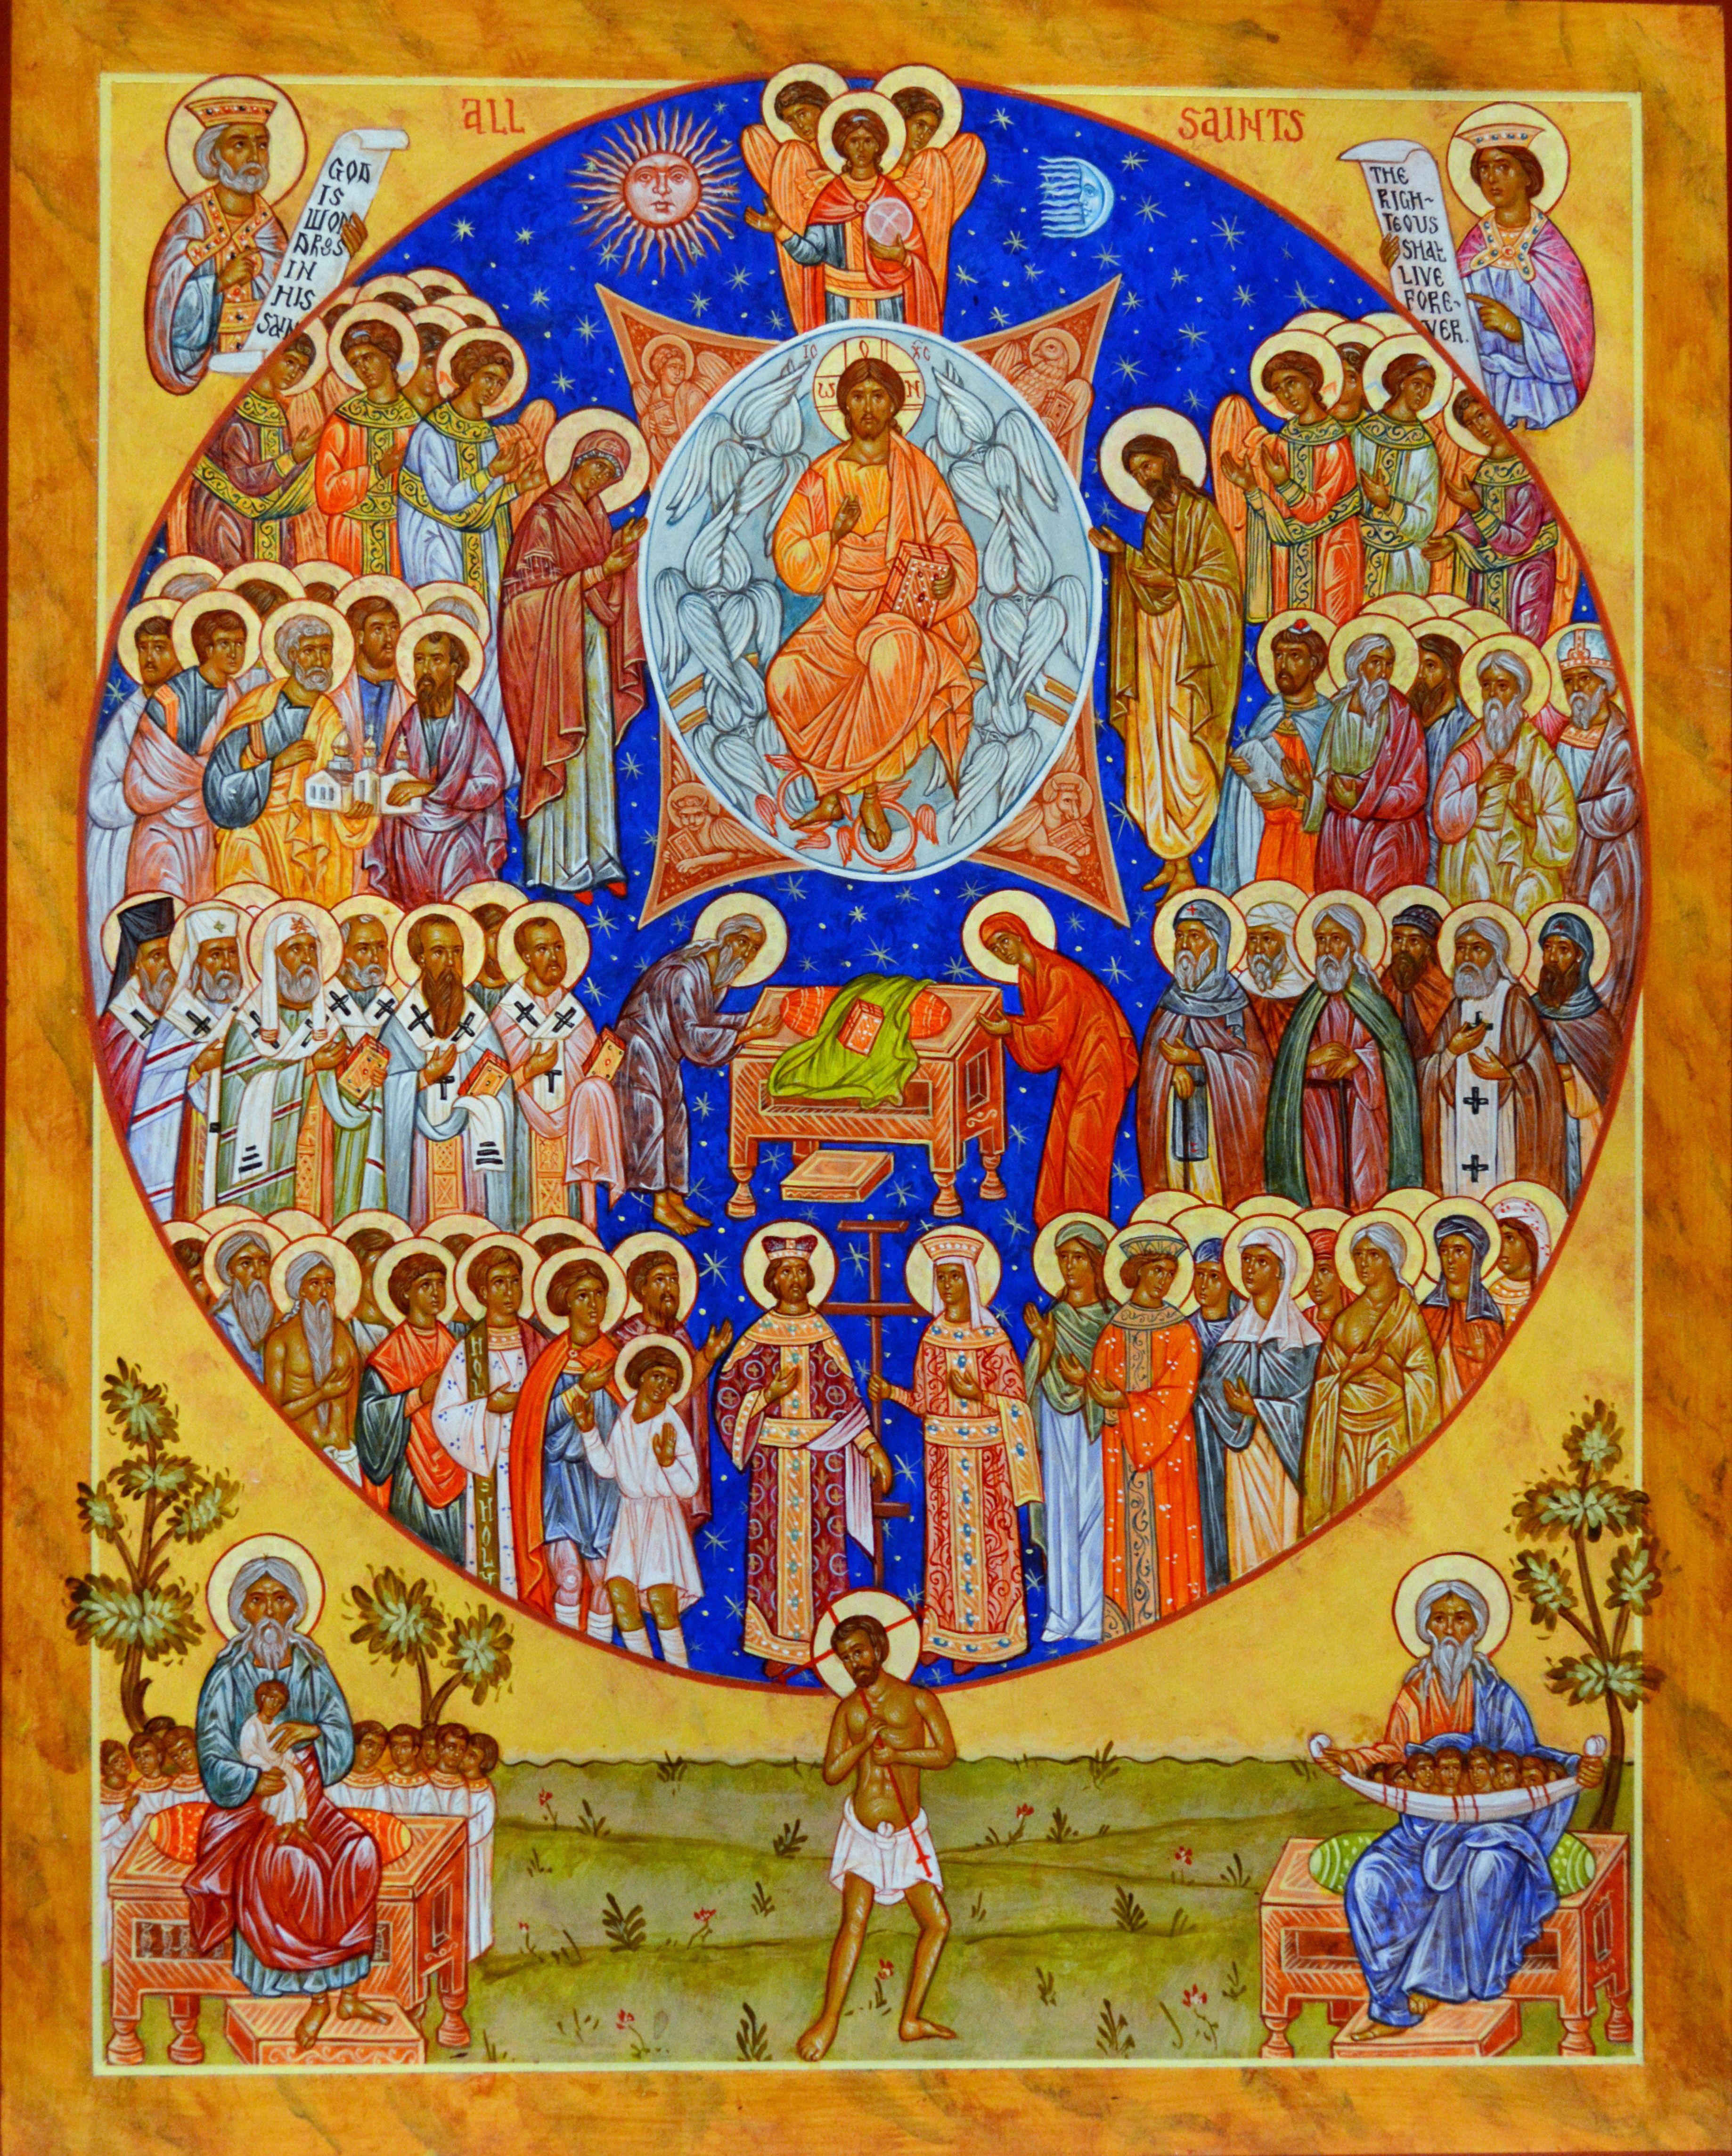 Everyday Holiness: Homily for the Sunday of All Saints in